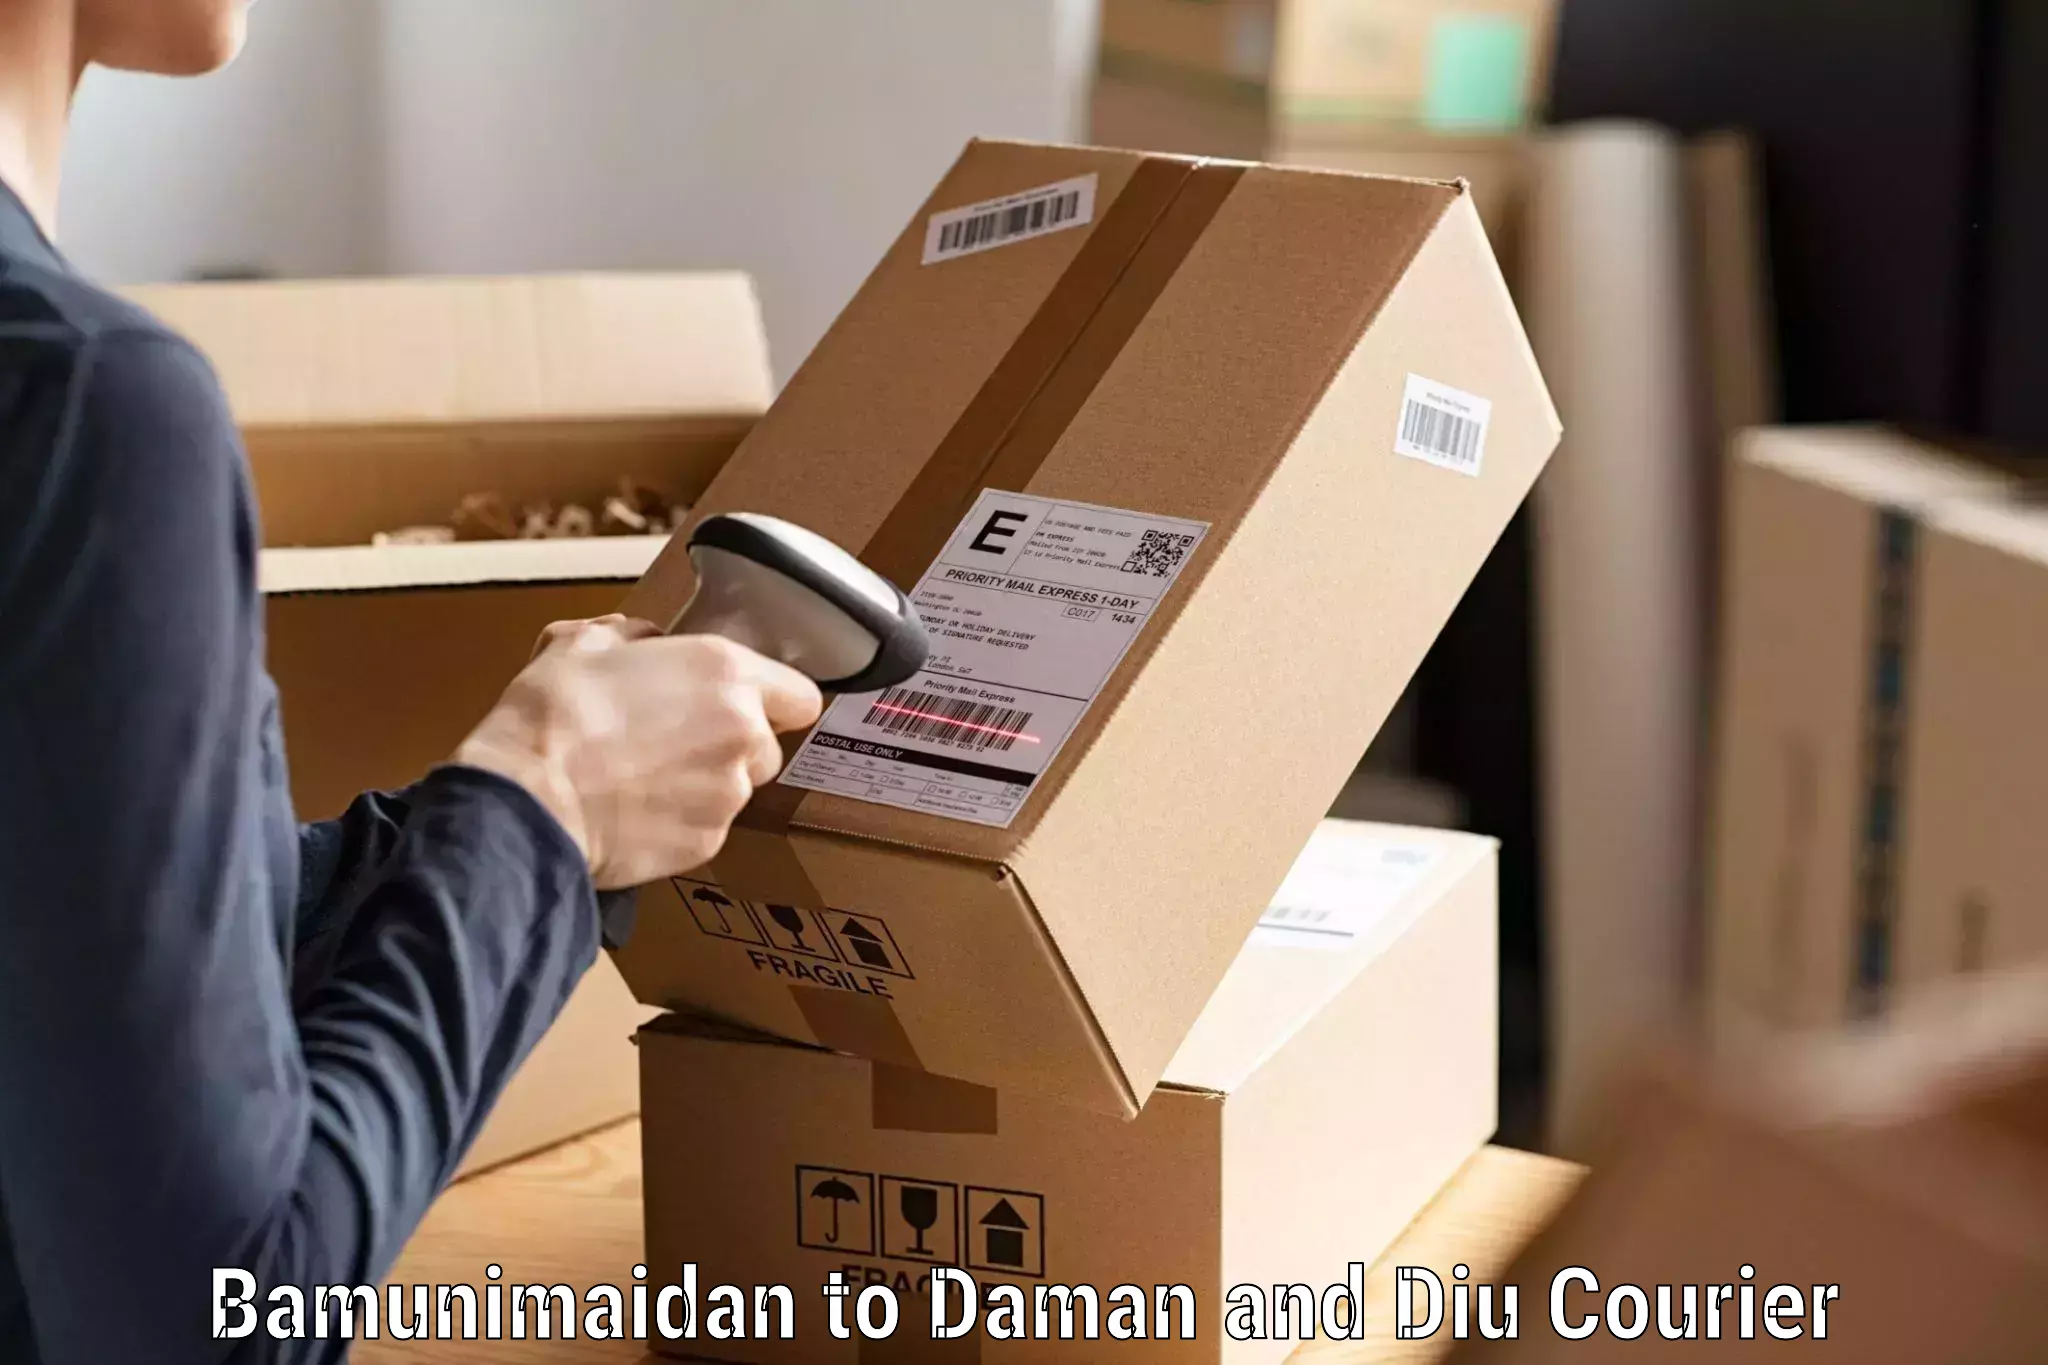 State-of-the-art courier technology Bamunimaidan to Daman and Diu